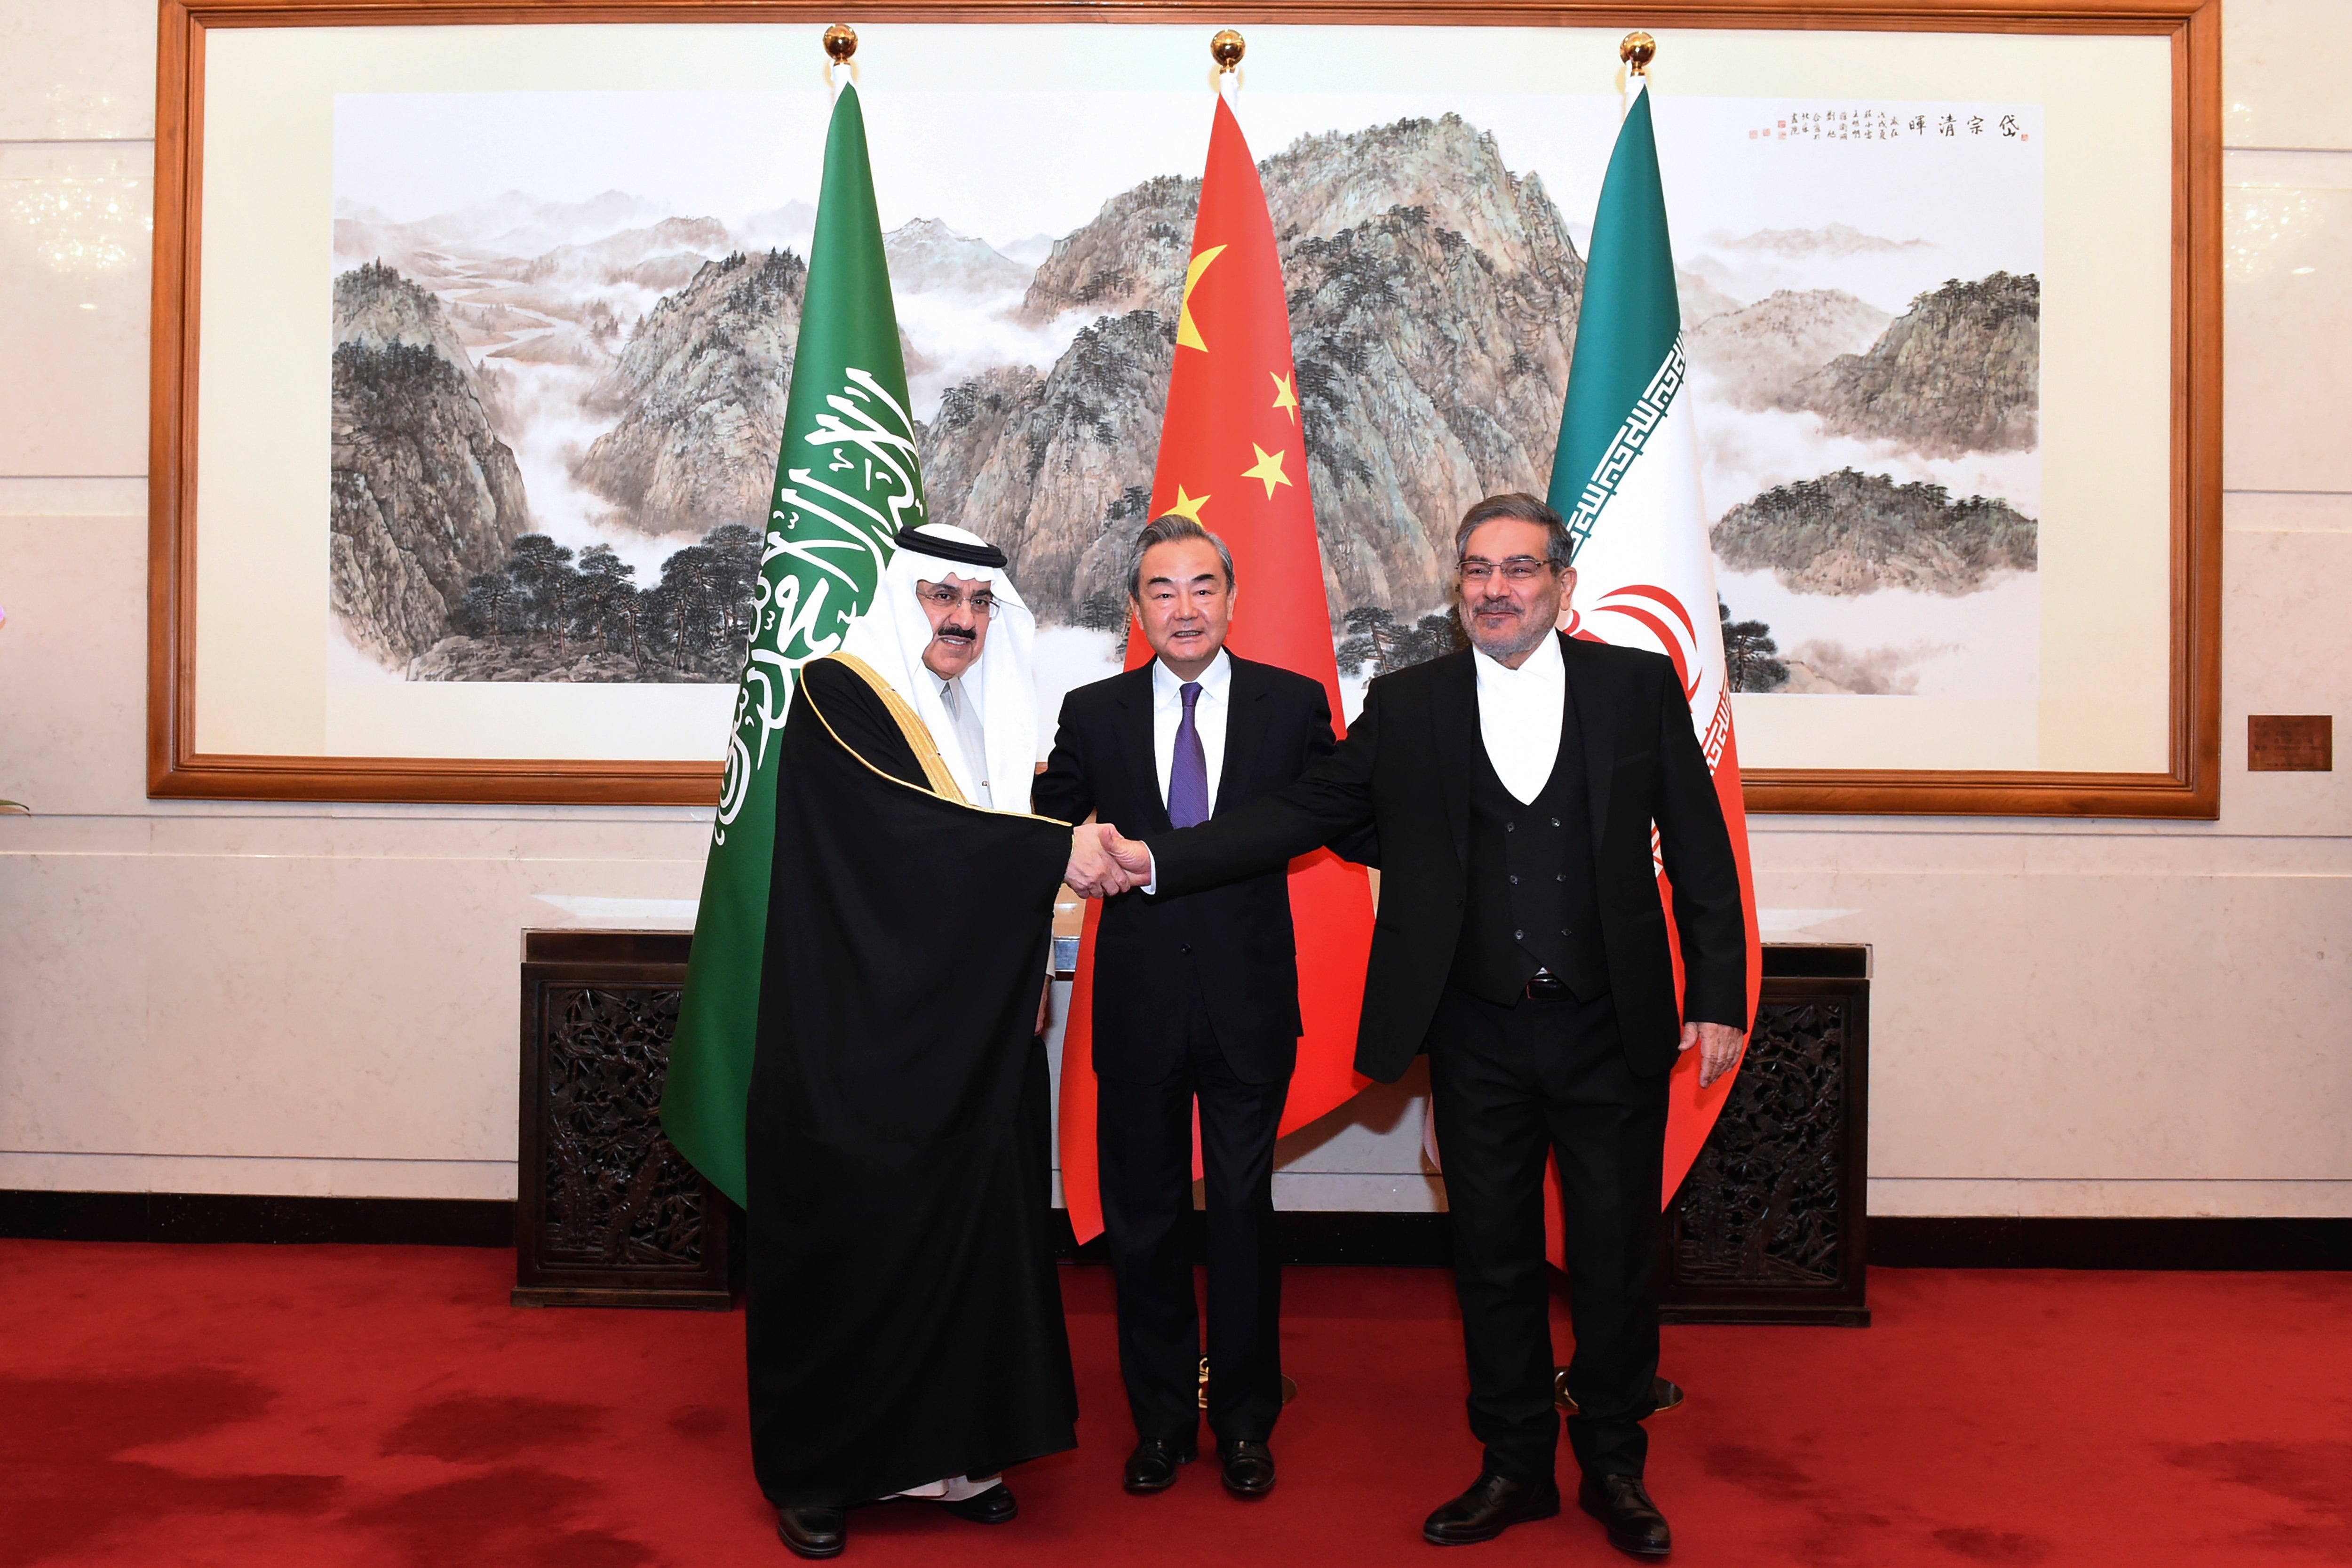 Ali Shamkhani, the secretary of Iran's Supreme National Security Council, right, shakes hands with Saudi national security adviser Musaad bin Mohammed al-Aiban, left, as Wang Yi, China's most senior diplomat, looks on